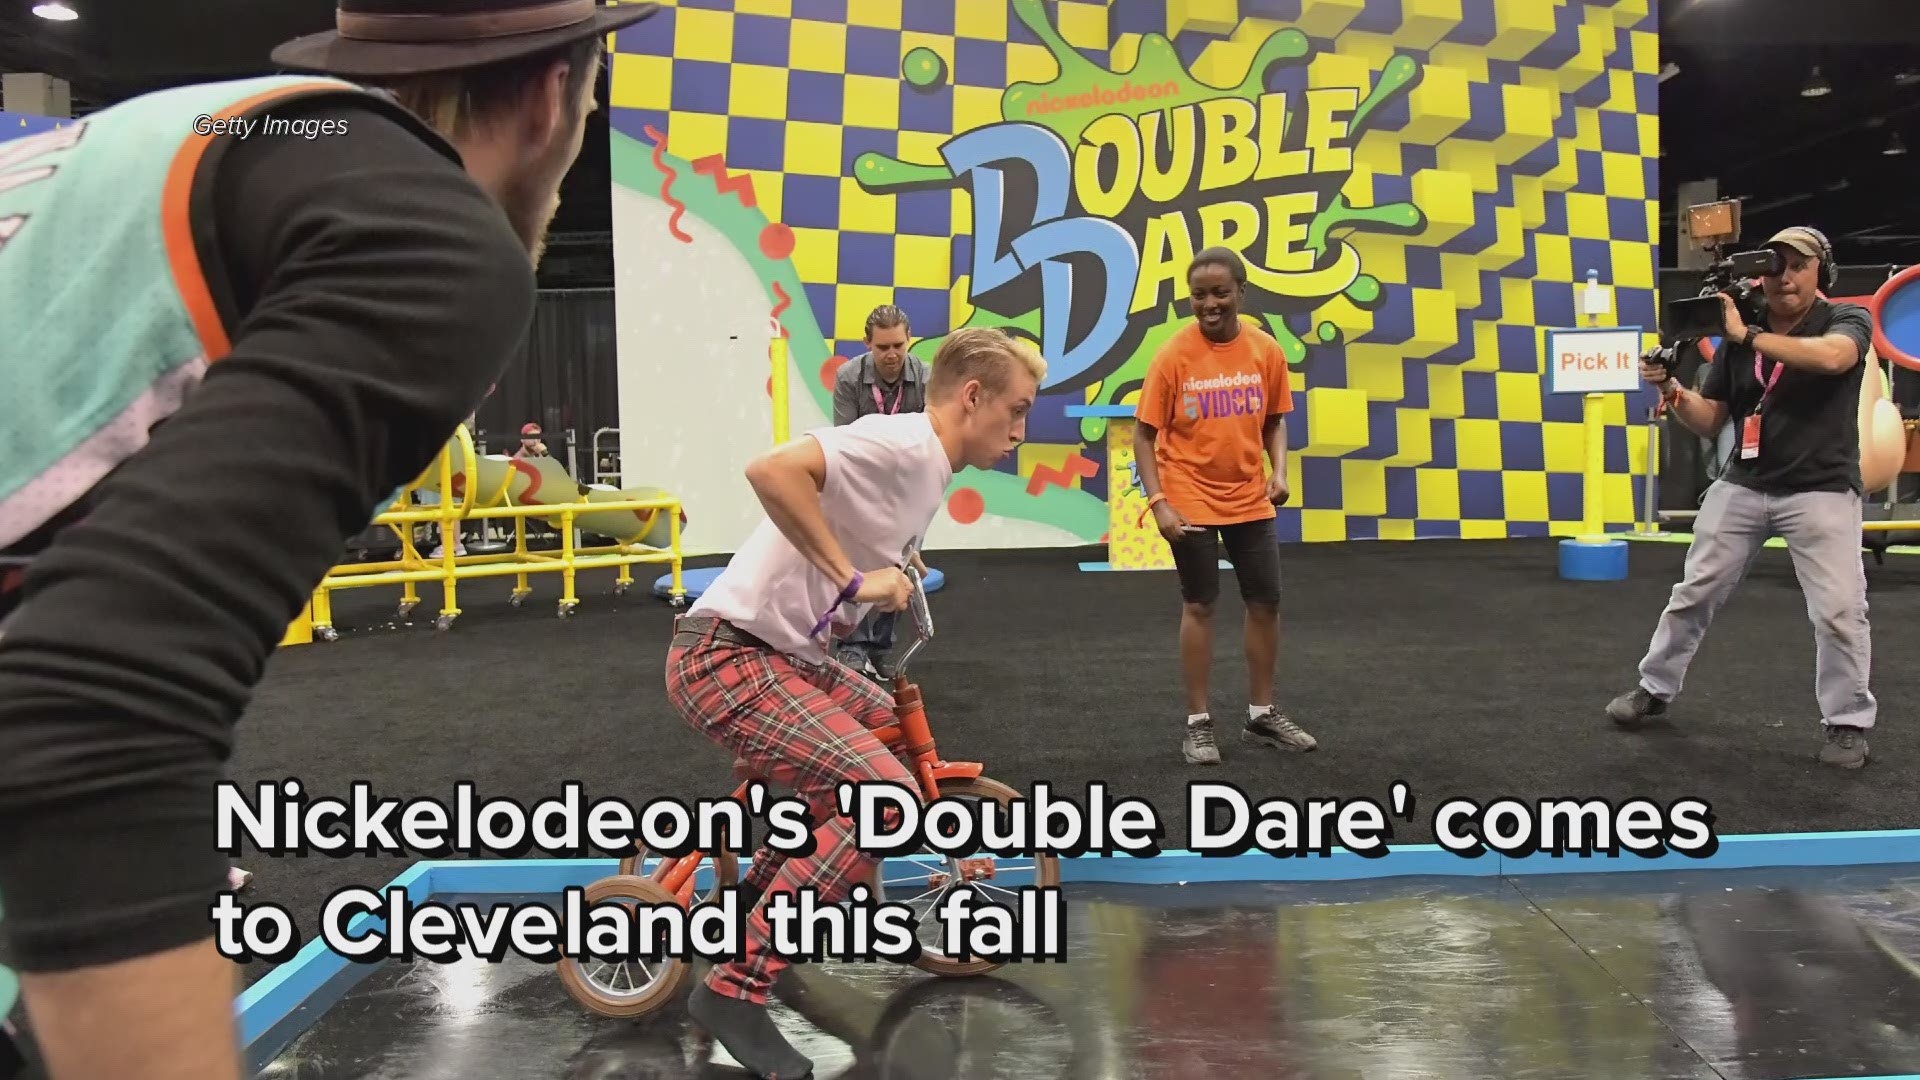 Nickelodeon's 'Double Dare' comes to Playhouse Square this fall